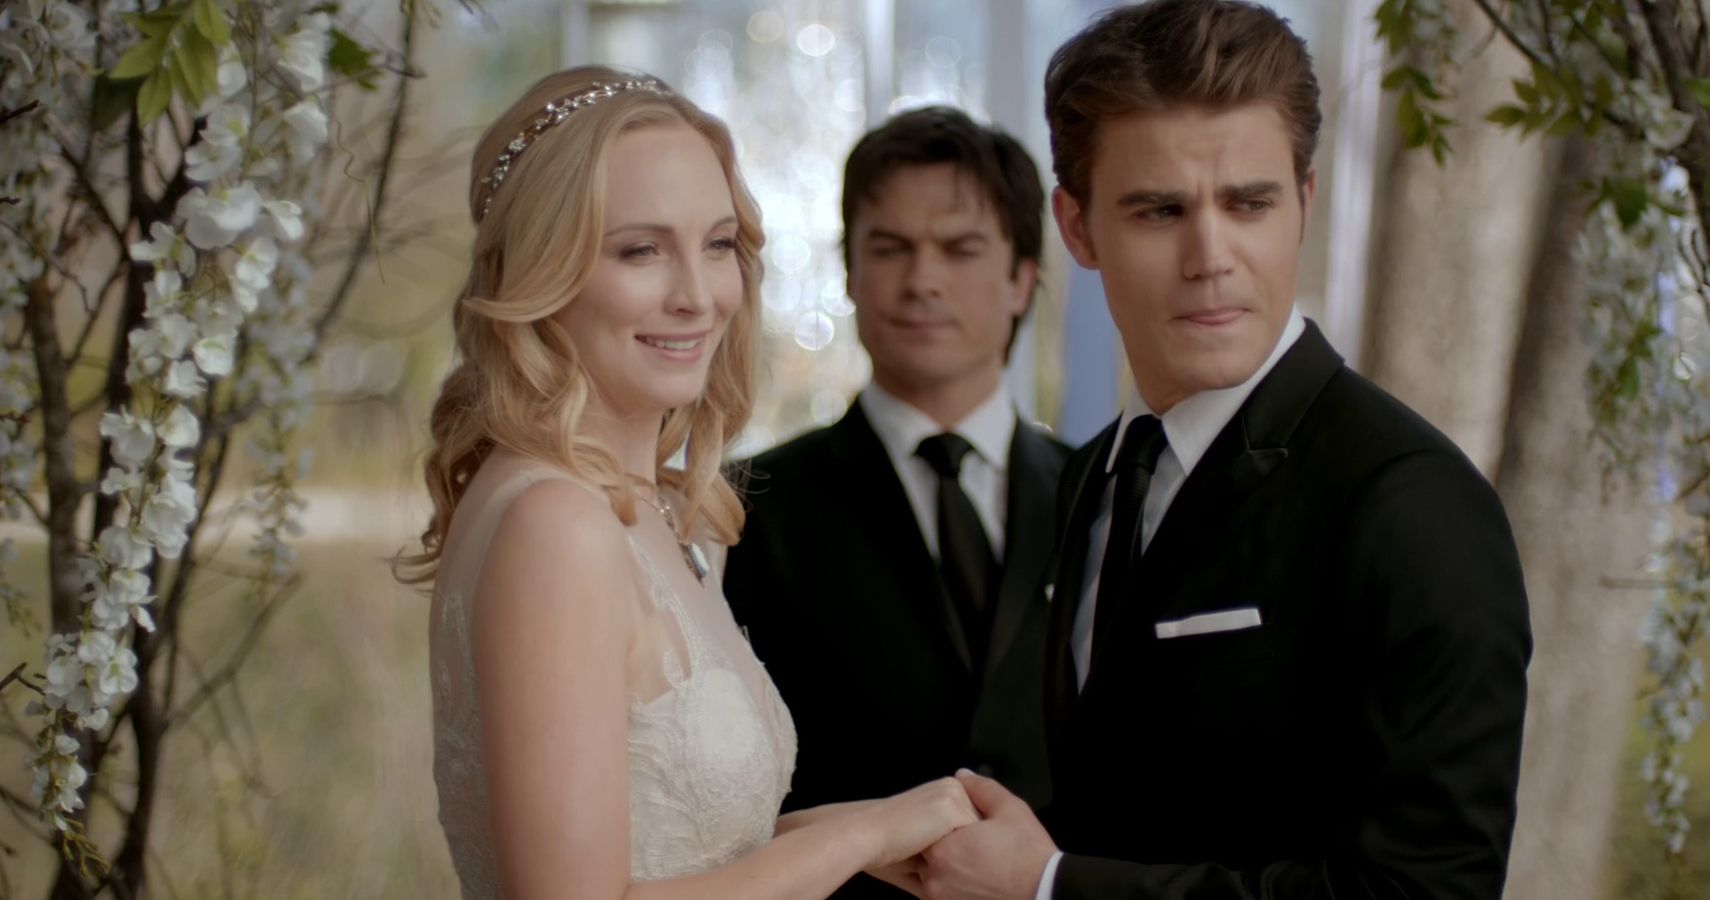 The Vampire Diaries 25 Couples Ranked And How Long They Lasted Subverted with stefan, who proclaims that he is 'done with her' after realizing she was in love with his brother. the vampire diaries 25 couples ranked